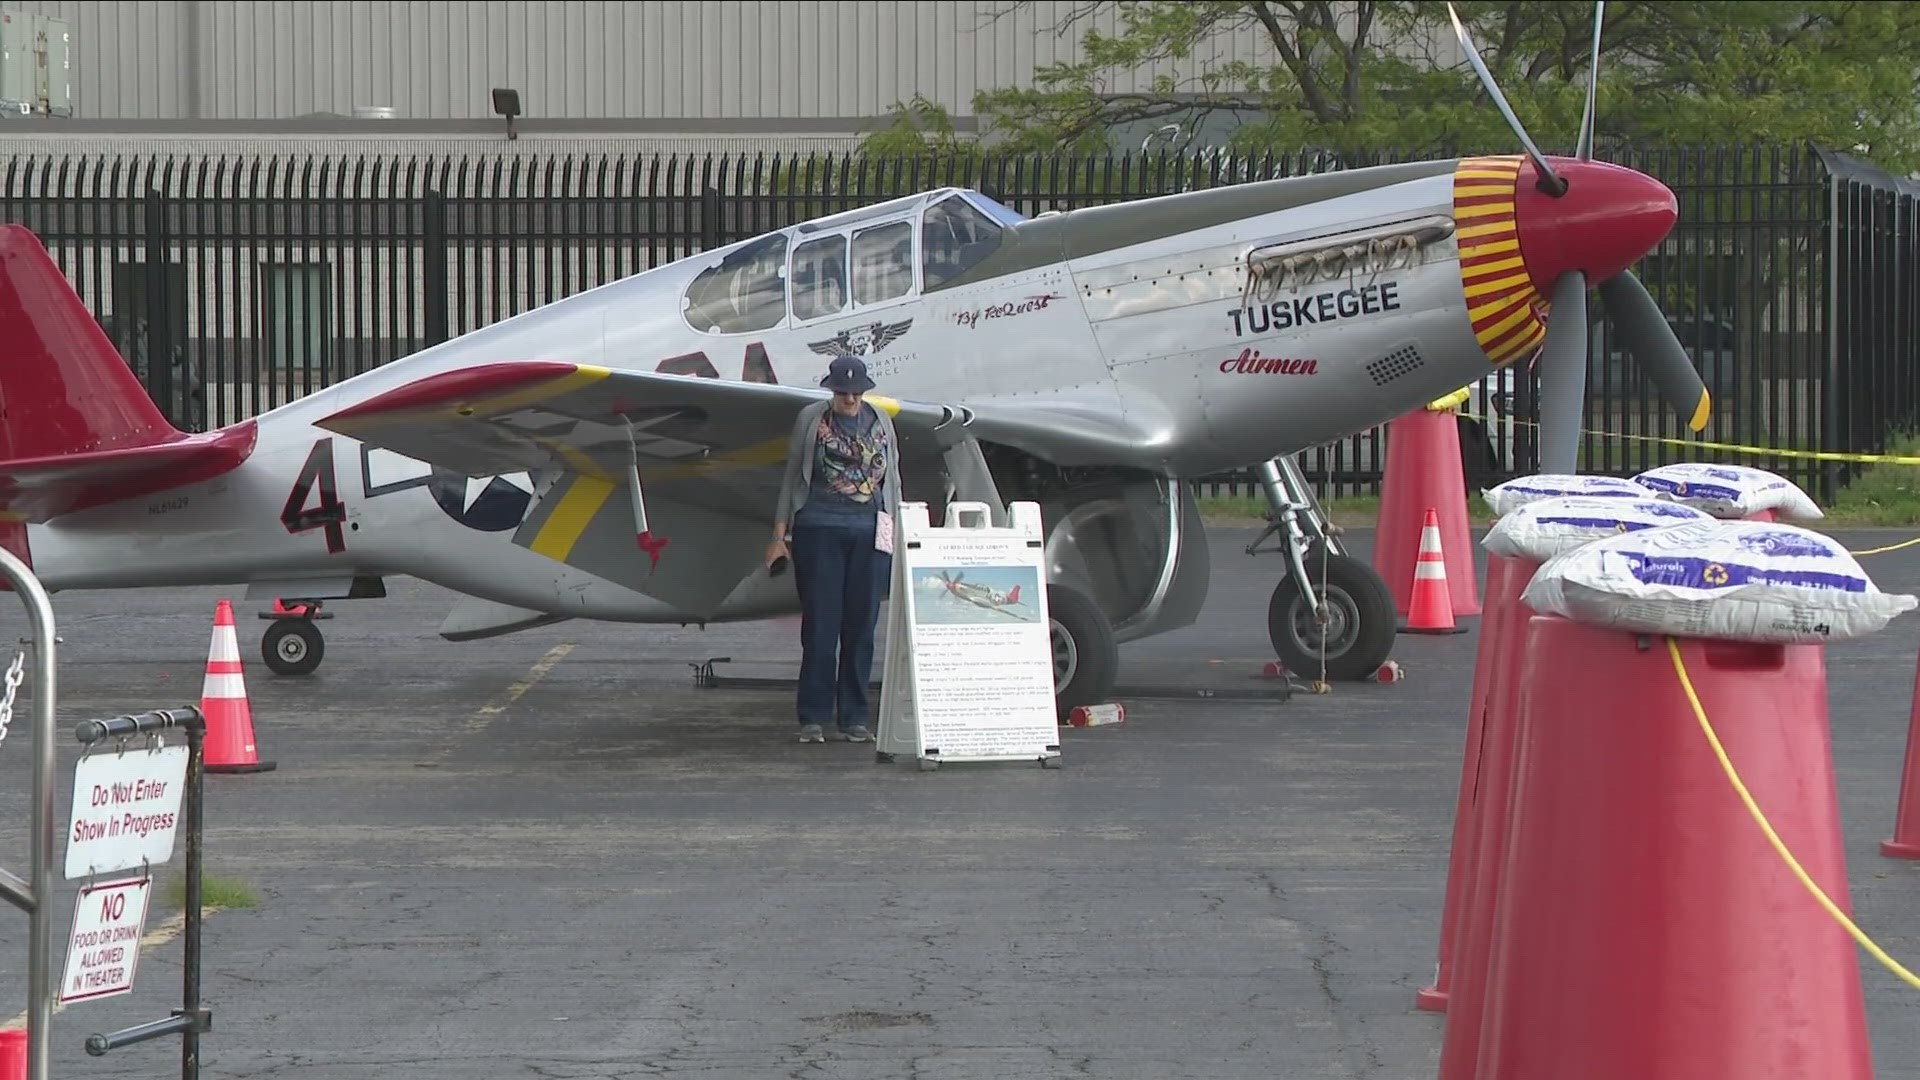 The Commemorative Air Force brought it's Rise Above exhibit to Buffalo to share a message of overcoming adversity